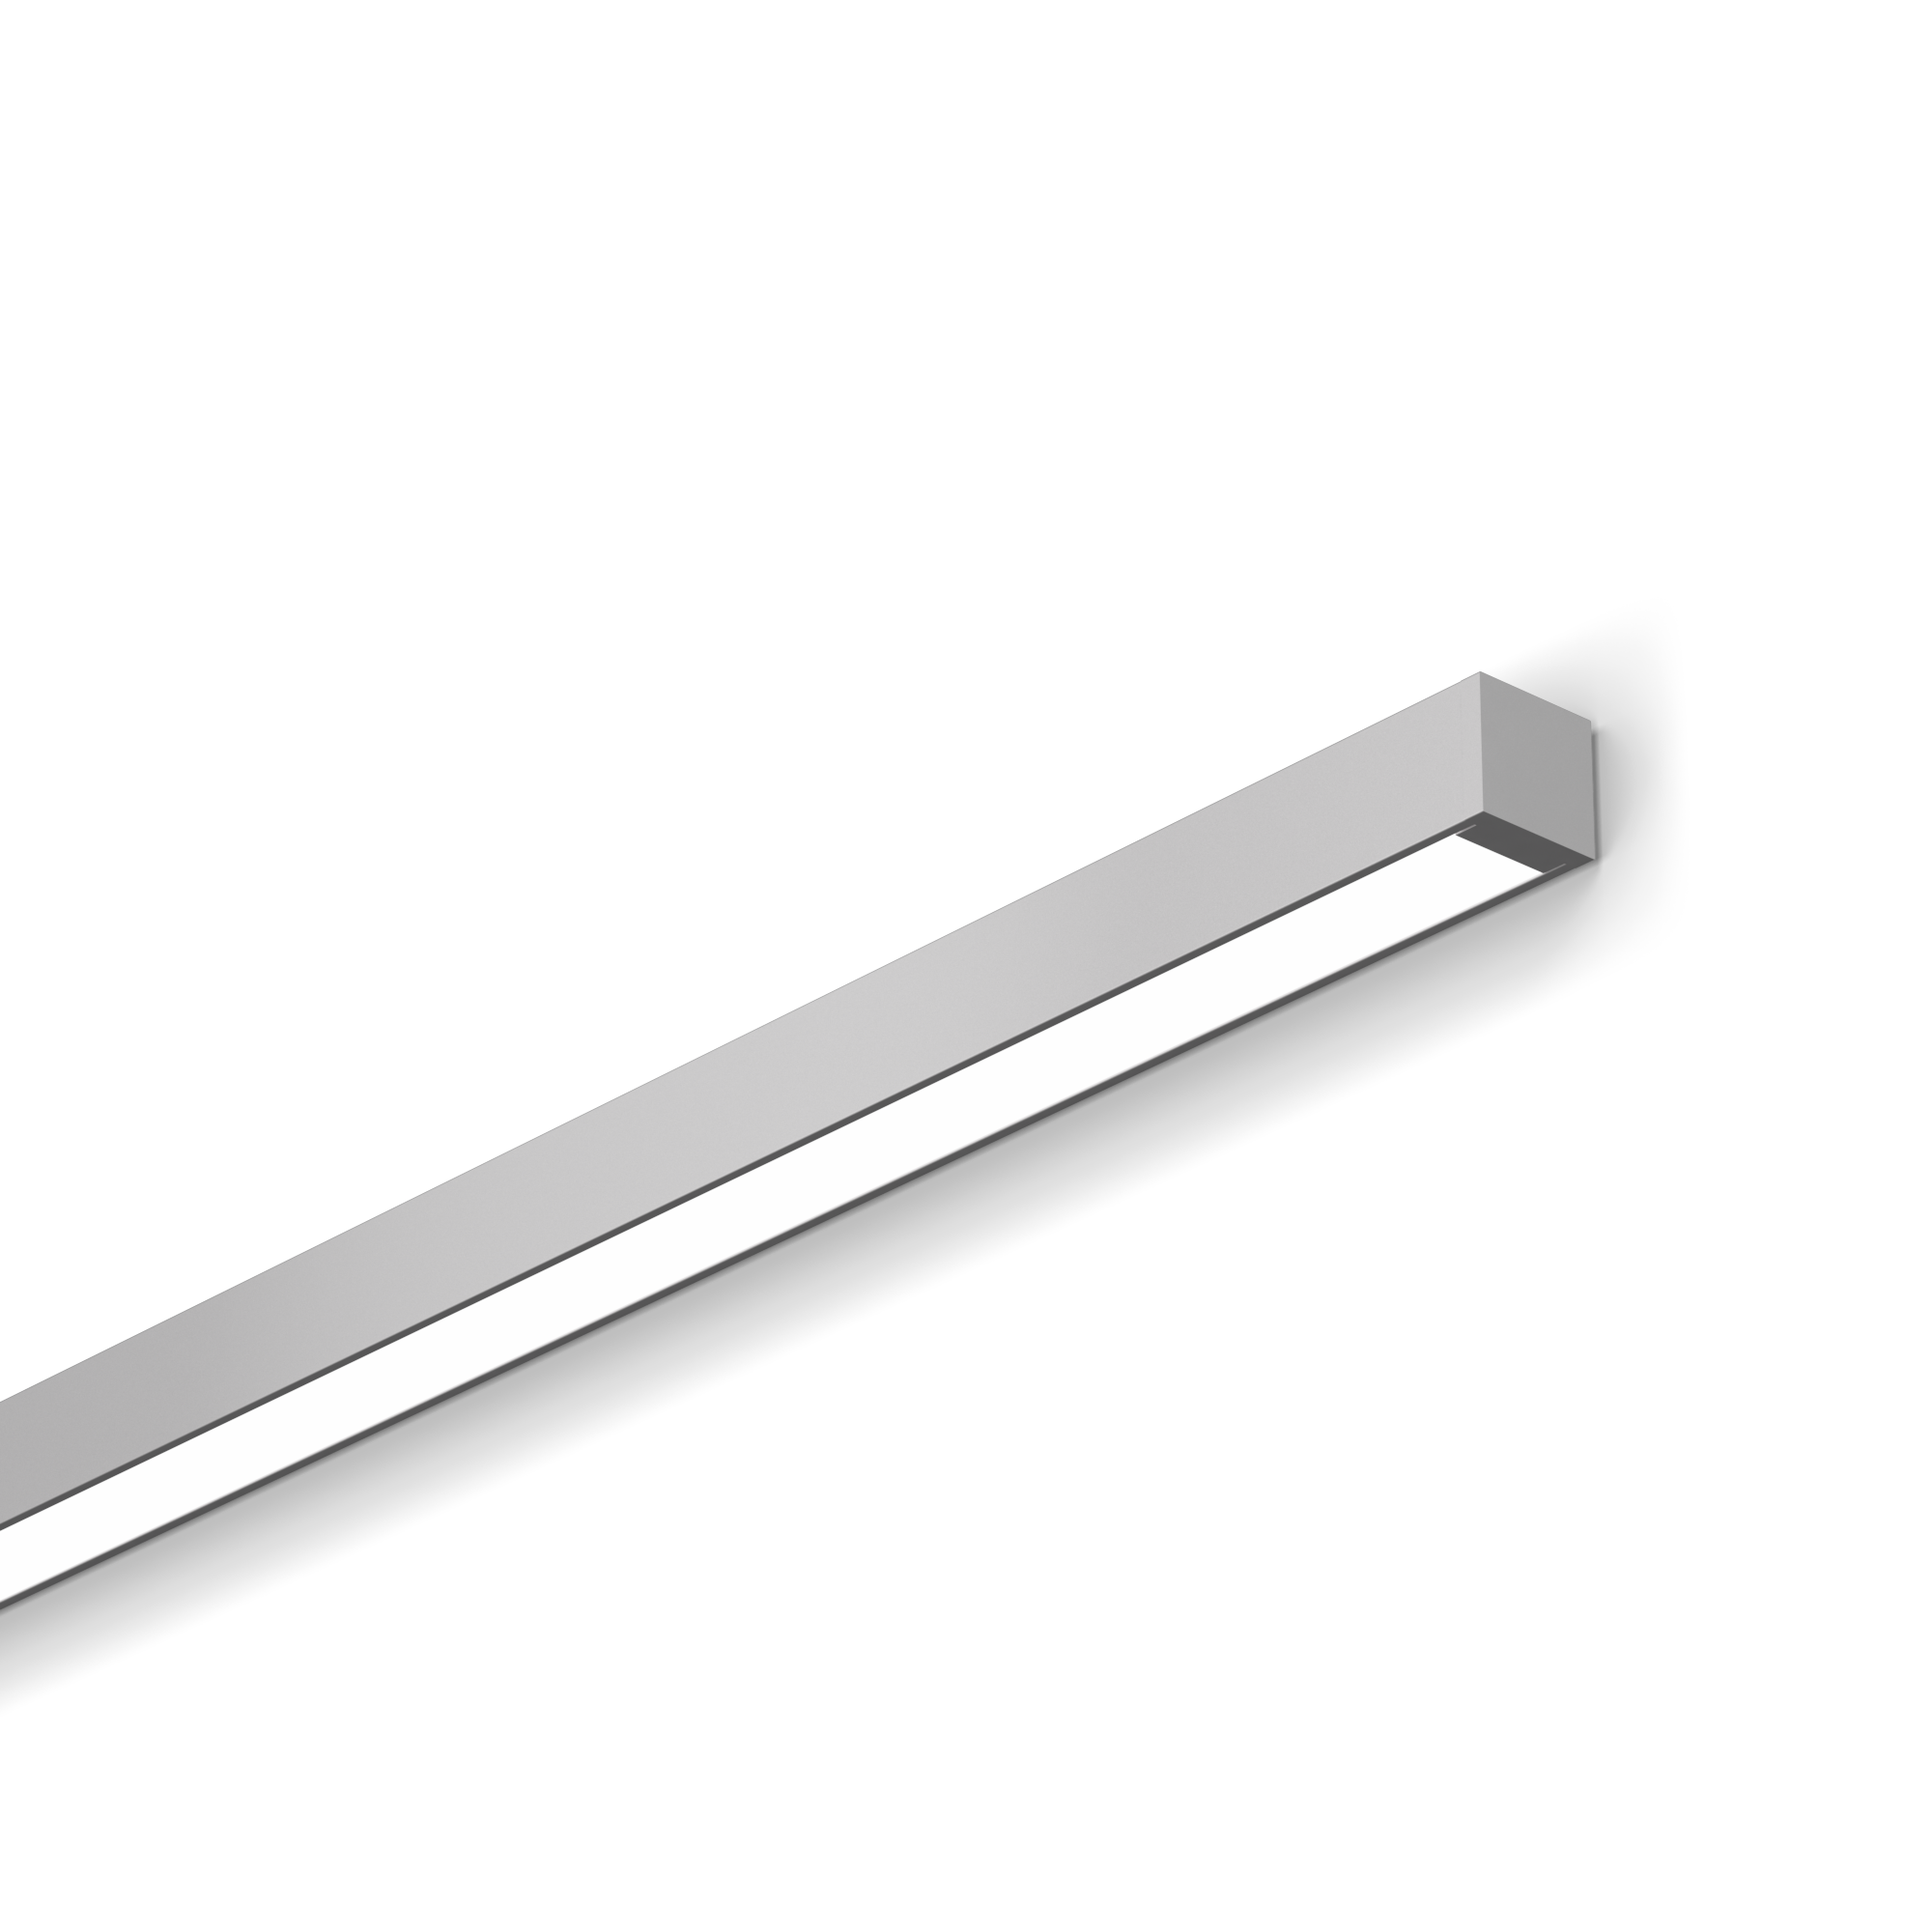 0.95” Ultra-Compact Wall Mounted LED Linear
NANOSquare is 0.95” square, bringing SmartBeam® capabilities to a wall-mounted graphic scale that complements architectural space. NANOSquare features a remote driver to remove visual bulk.

 

Square Profile: 0.95” (24mm) x 0.95” (24mm)